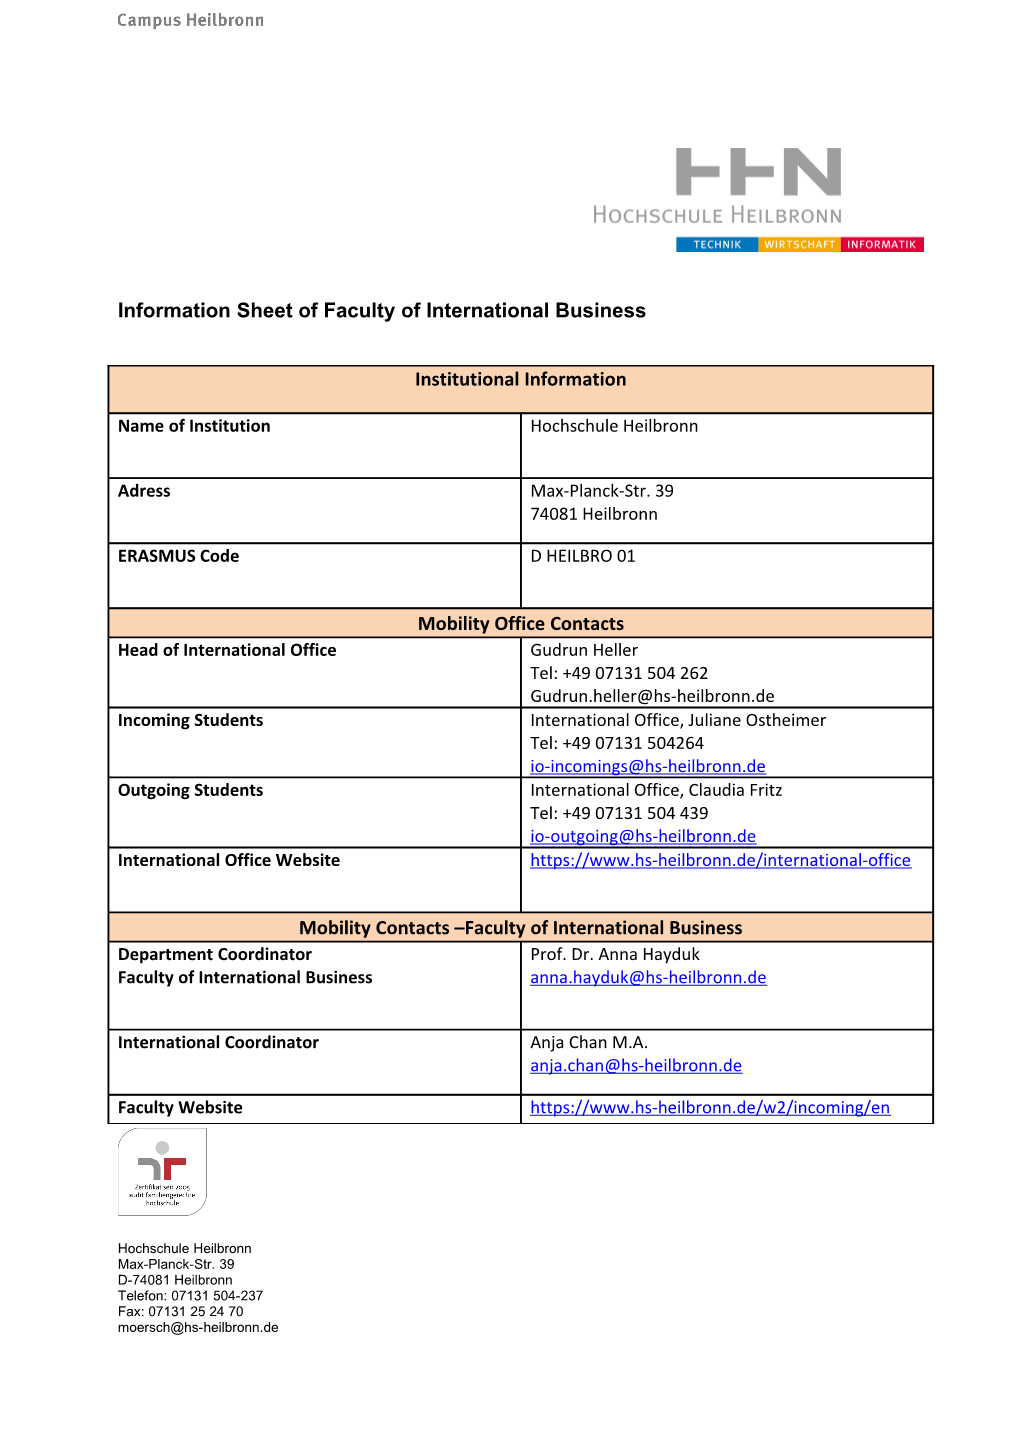 Information Sheet of Faculty of International Business